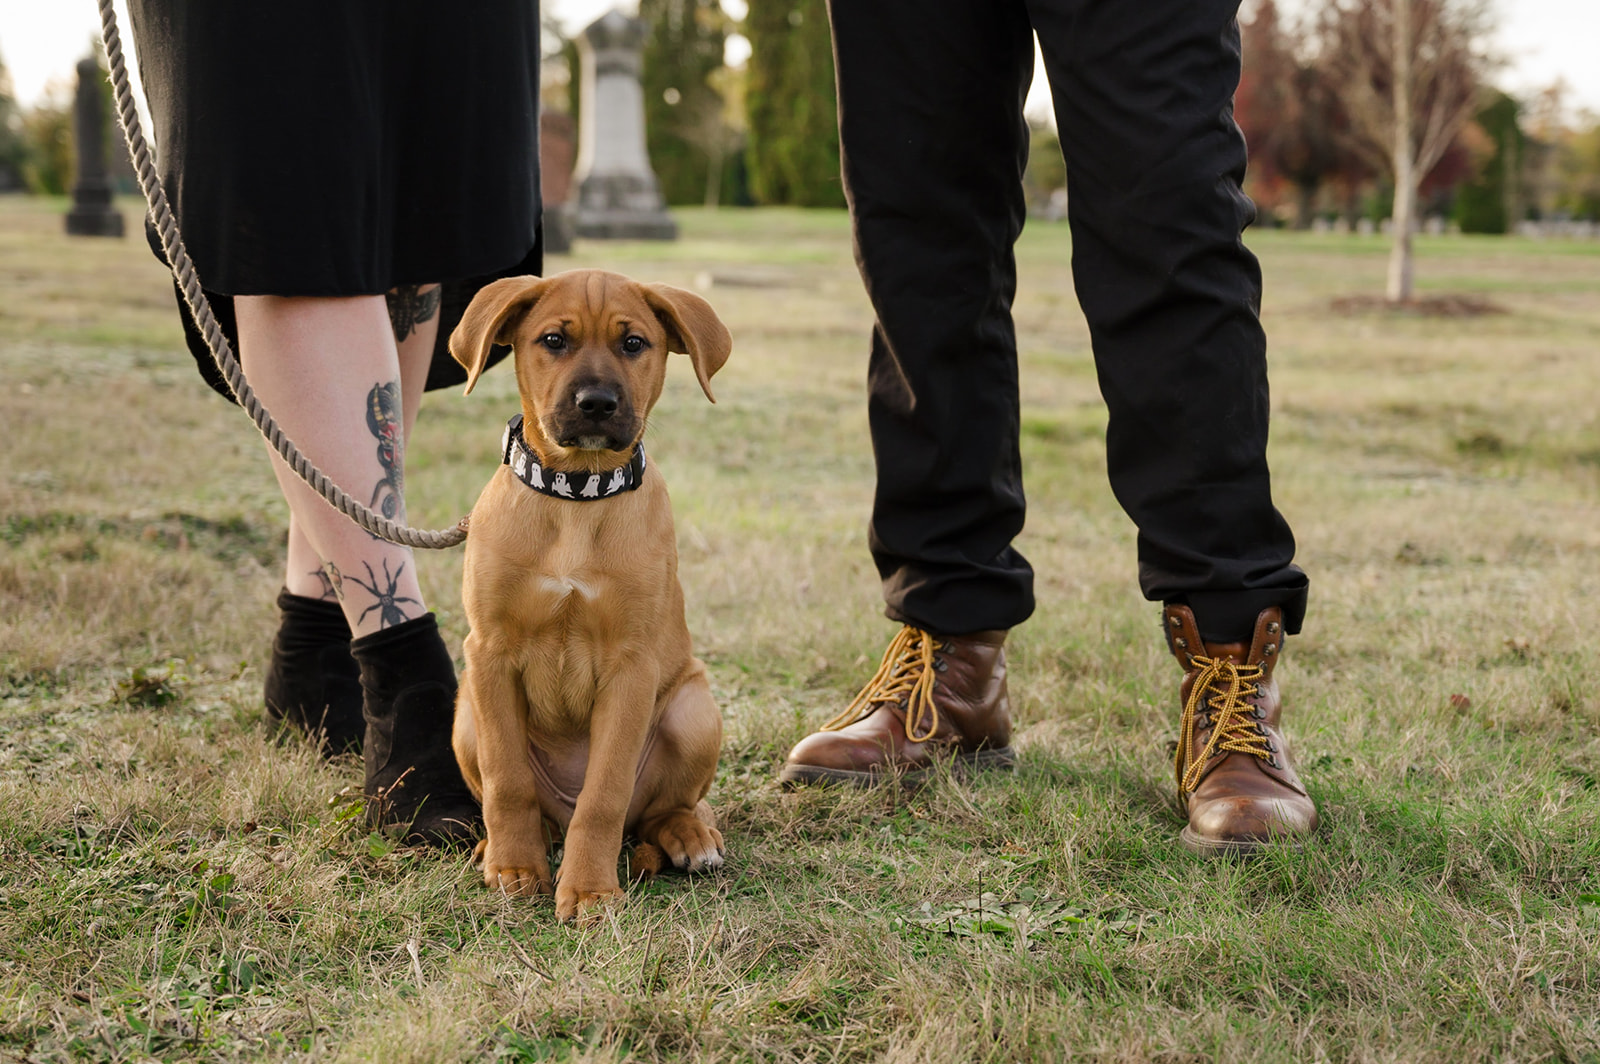 engagement photos with puppy